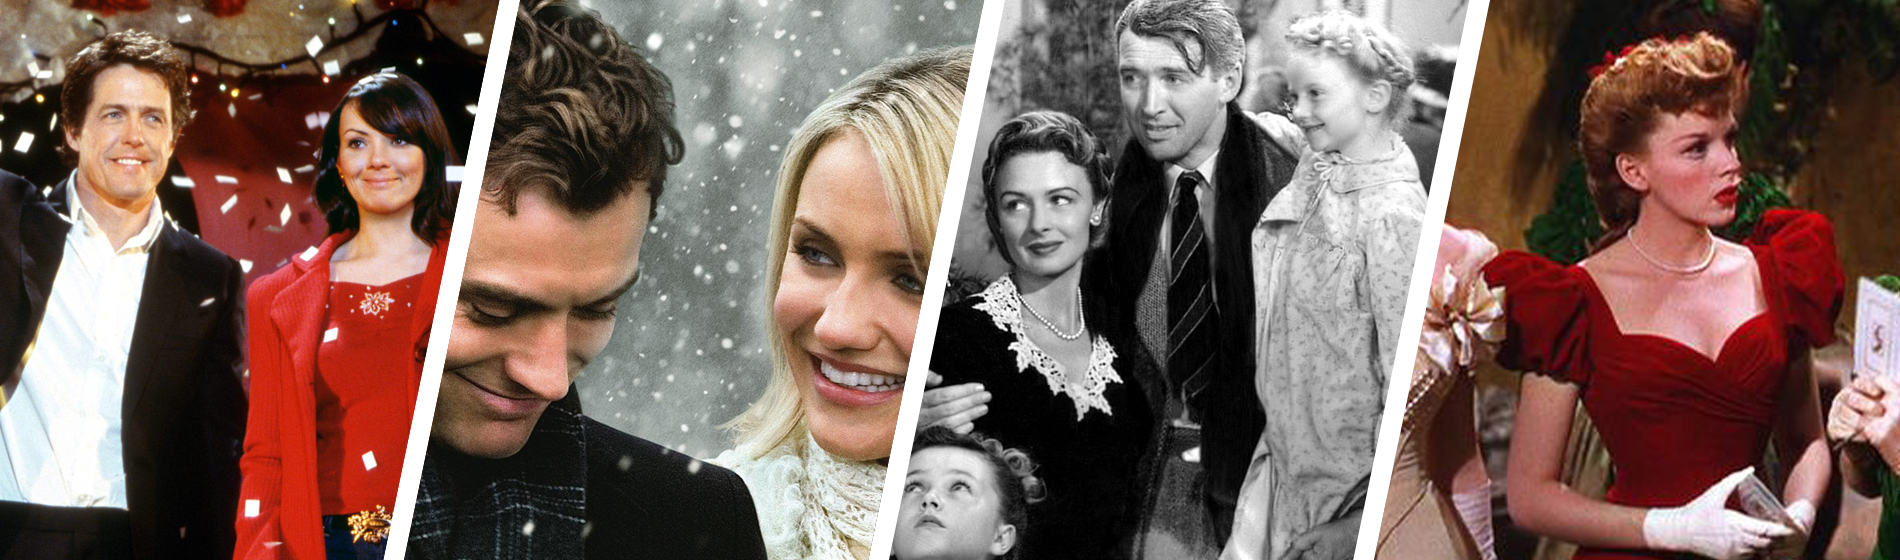 Love Actually, The Holiday, It's a Wonderful Life, Meet Me in St Louis